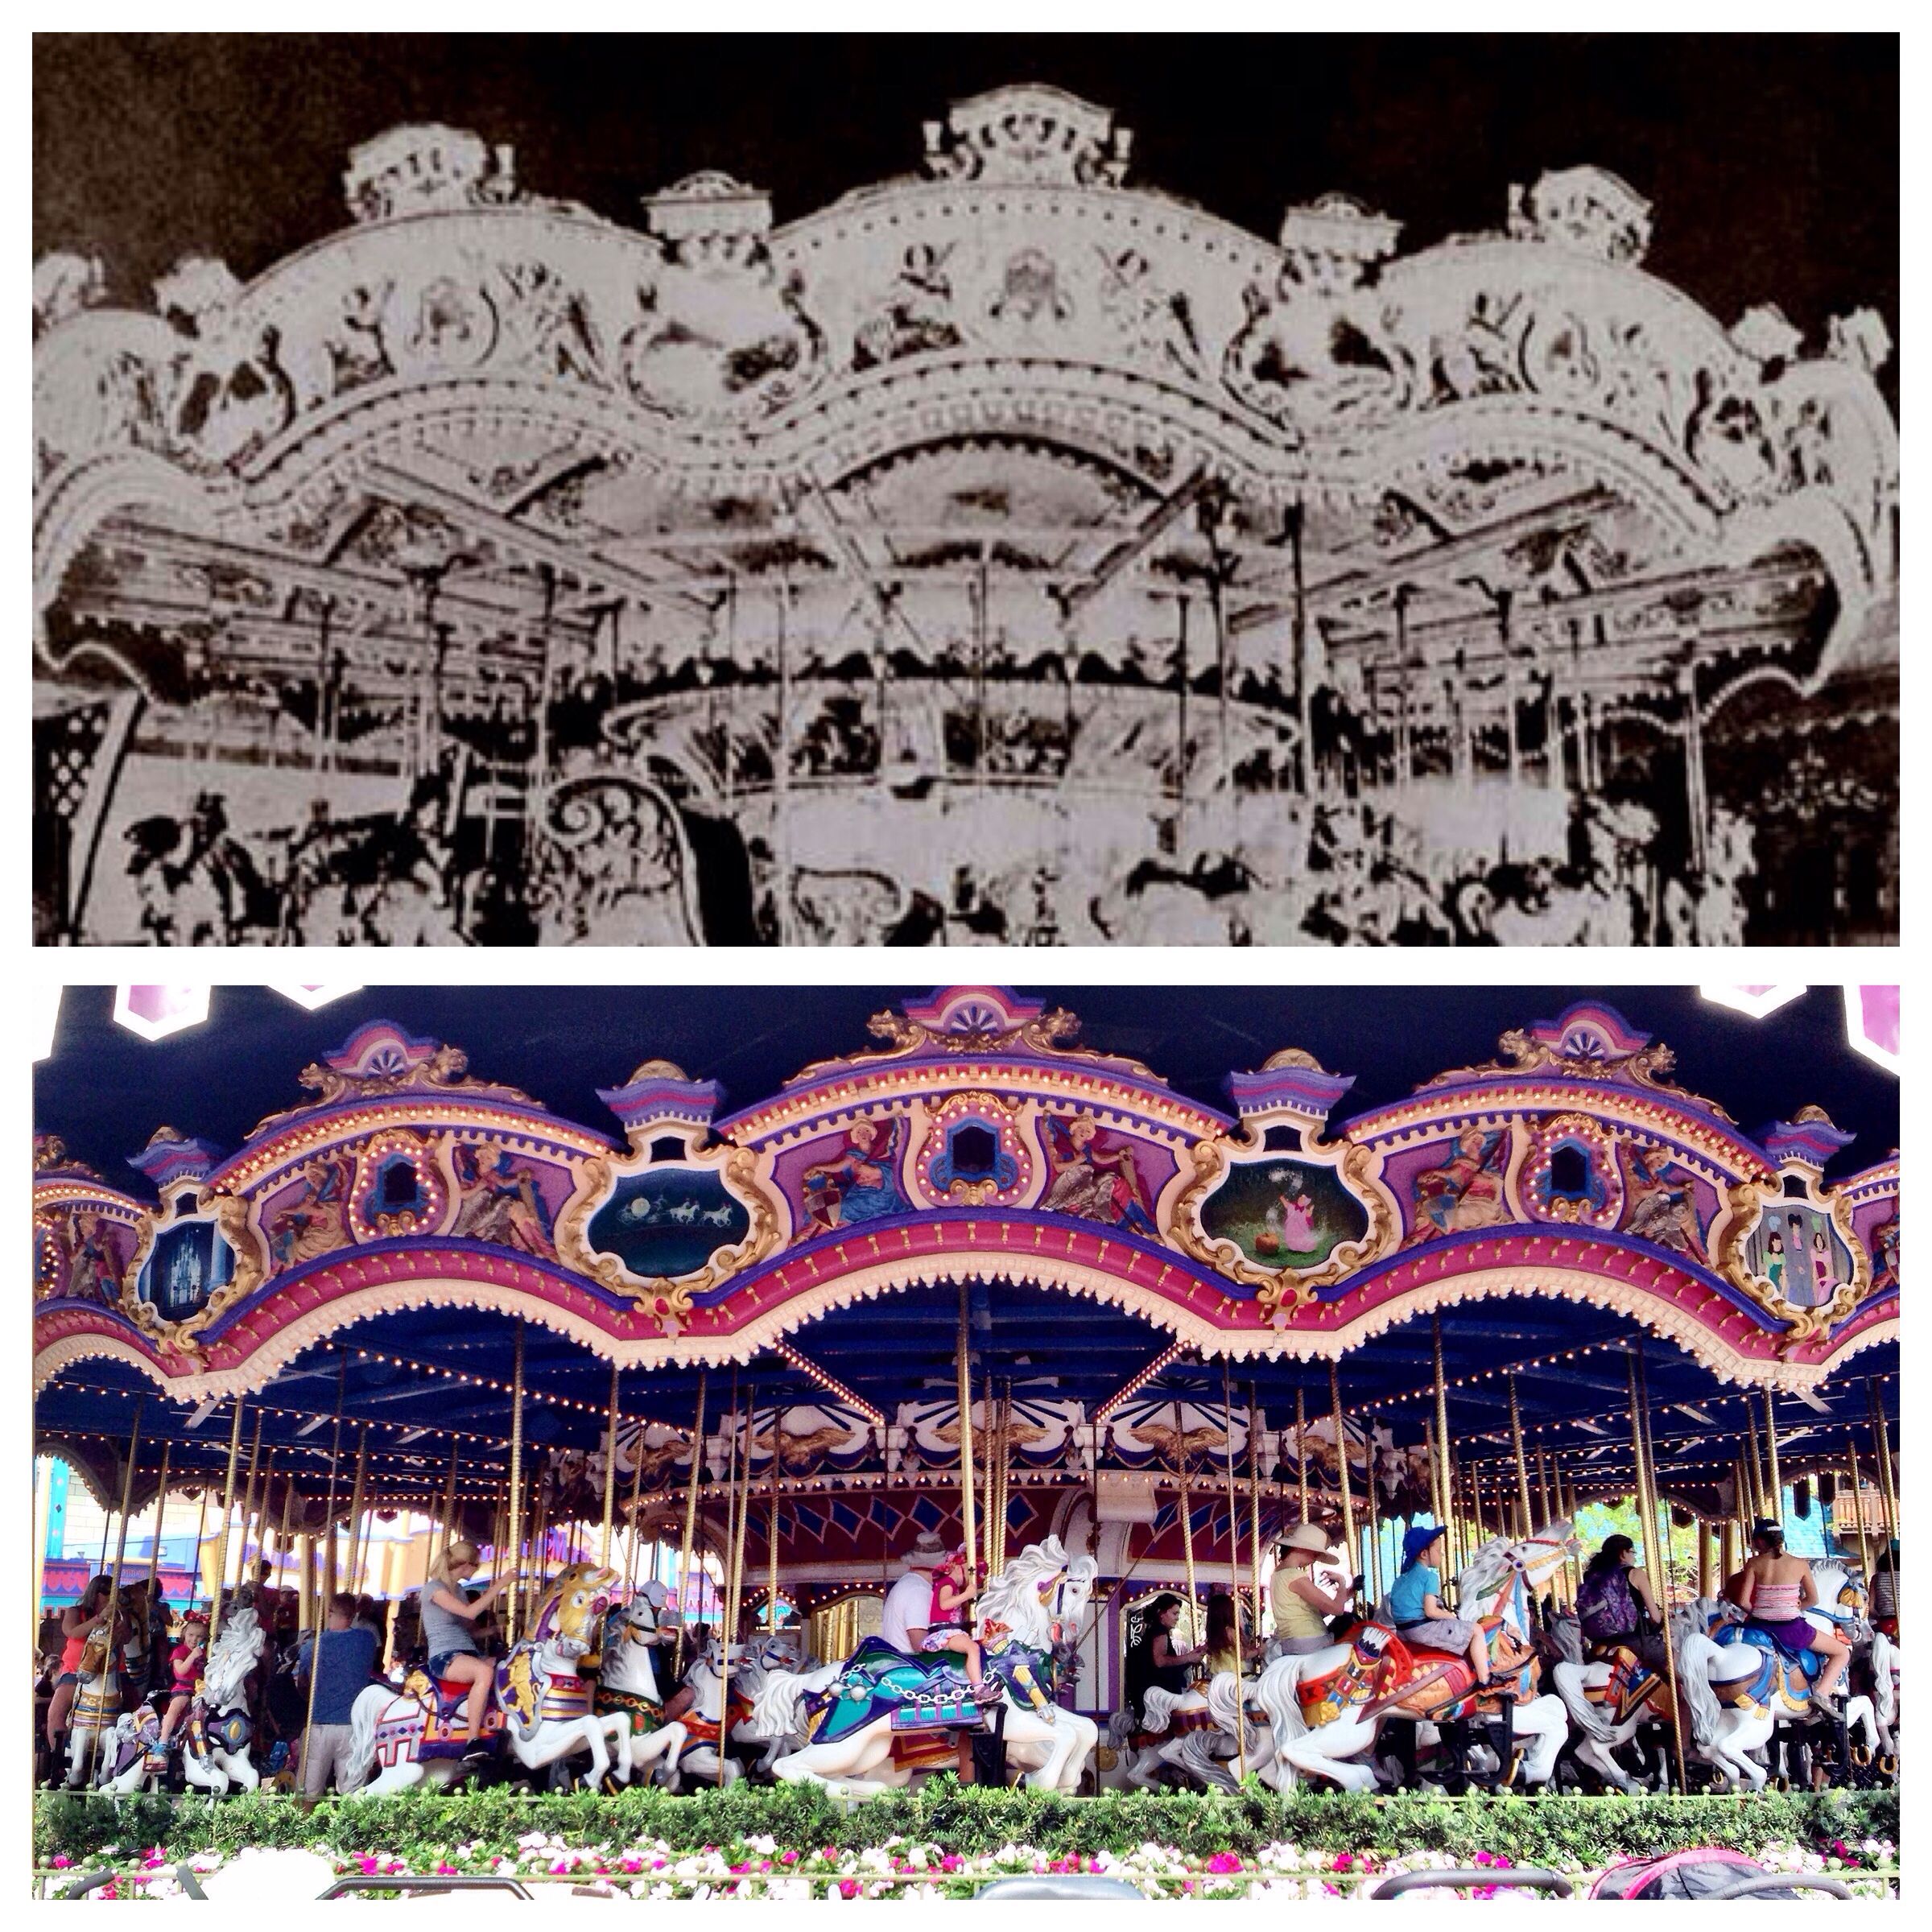 Disney Magic Kingdom Carousel Then and Now - built in 1917 in ...